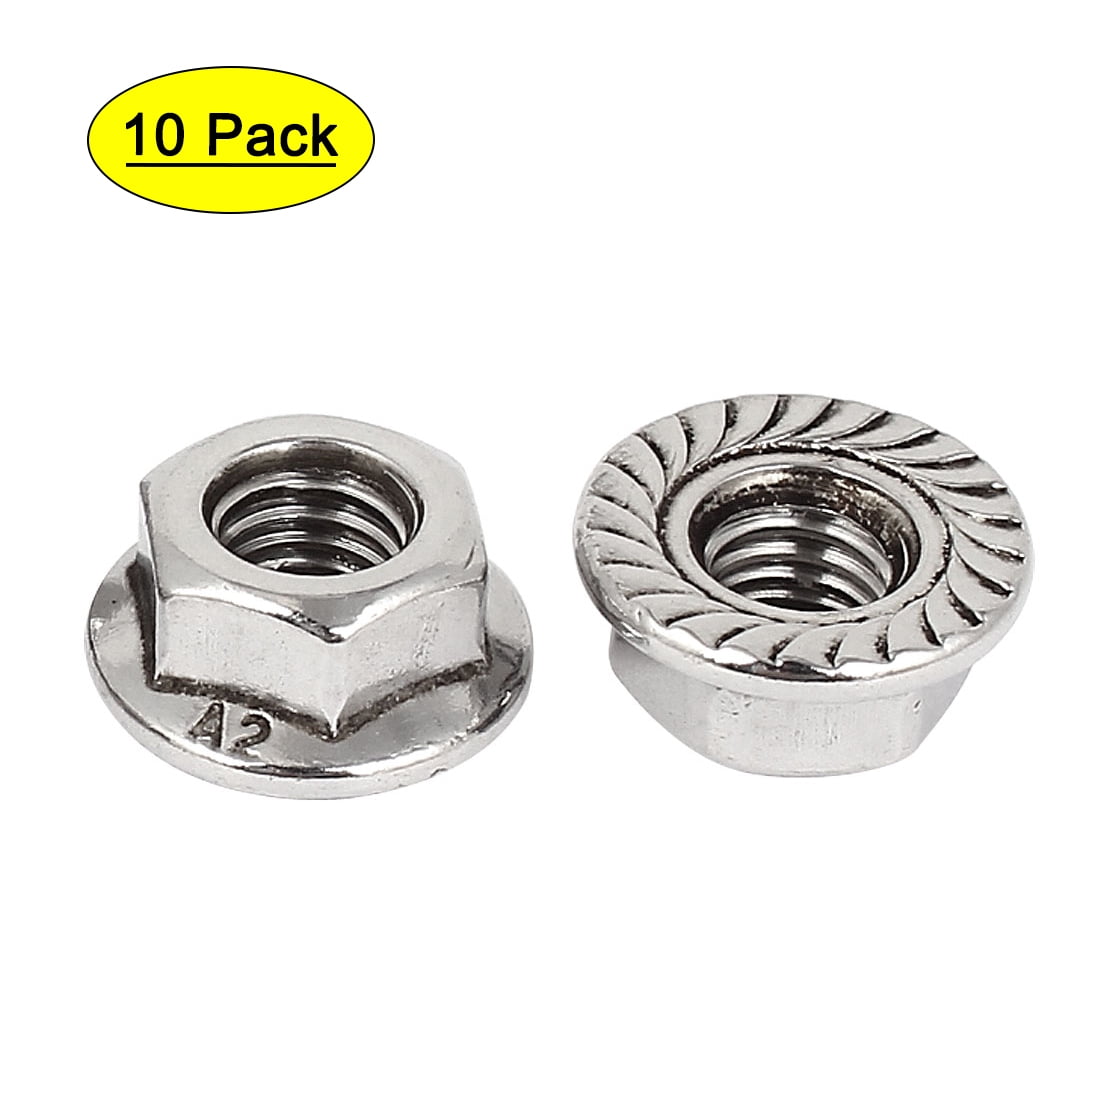 6mm M6 Stainless Steel A2 All Metal Self Locking Nut Pack of 10